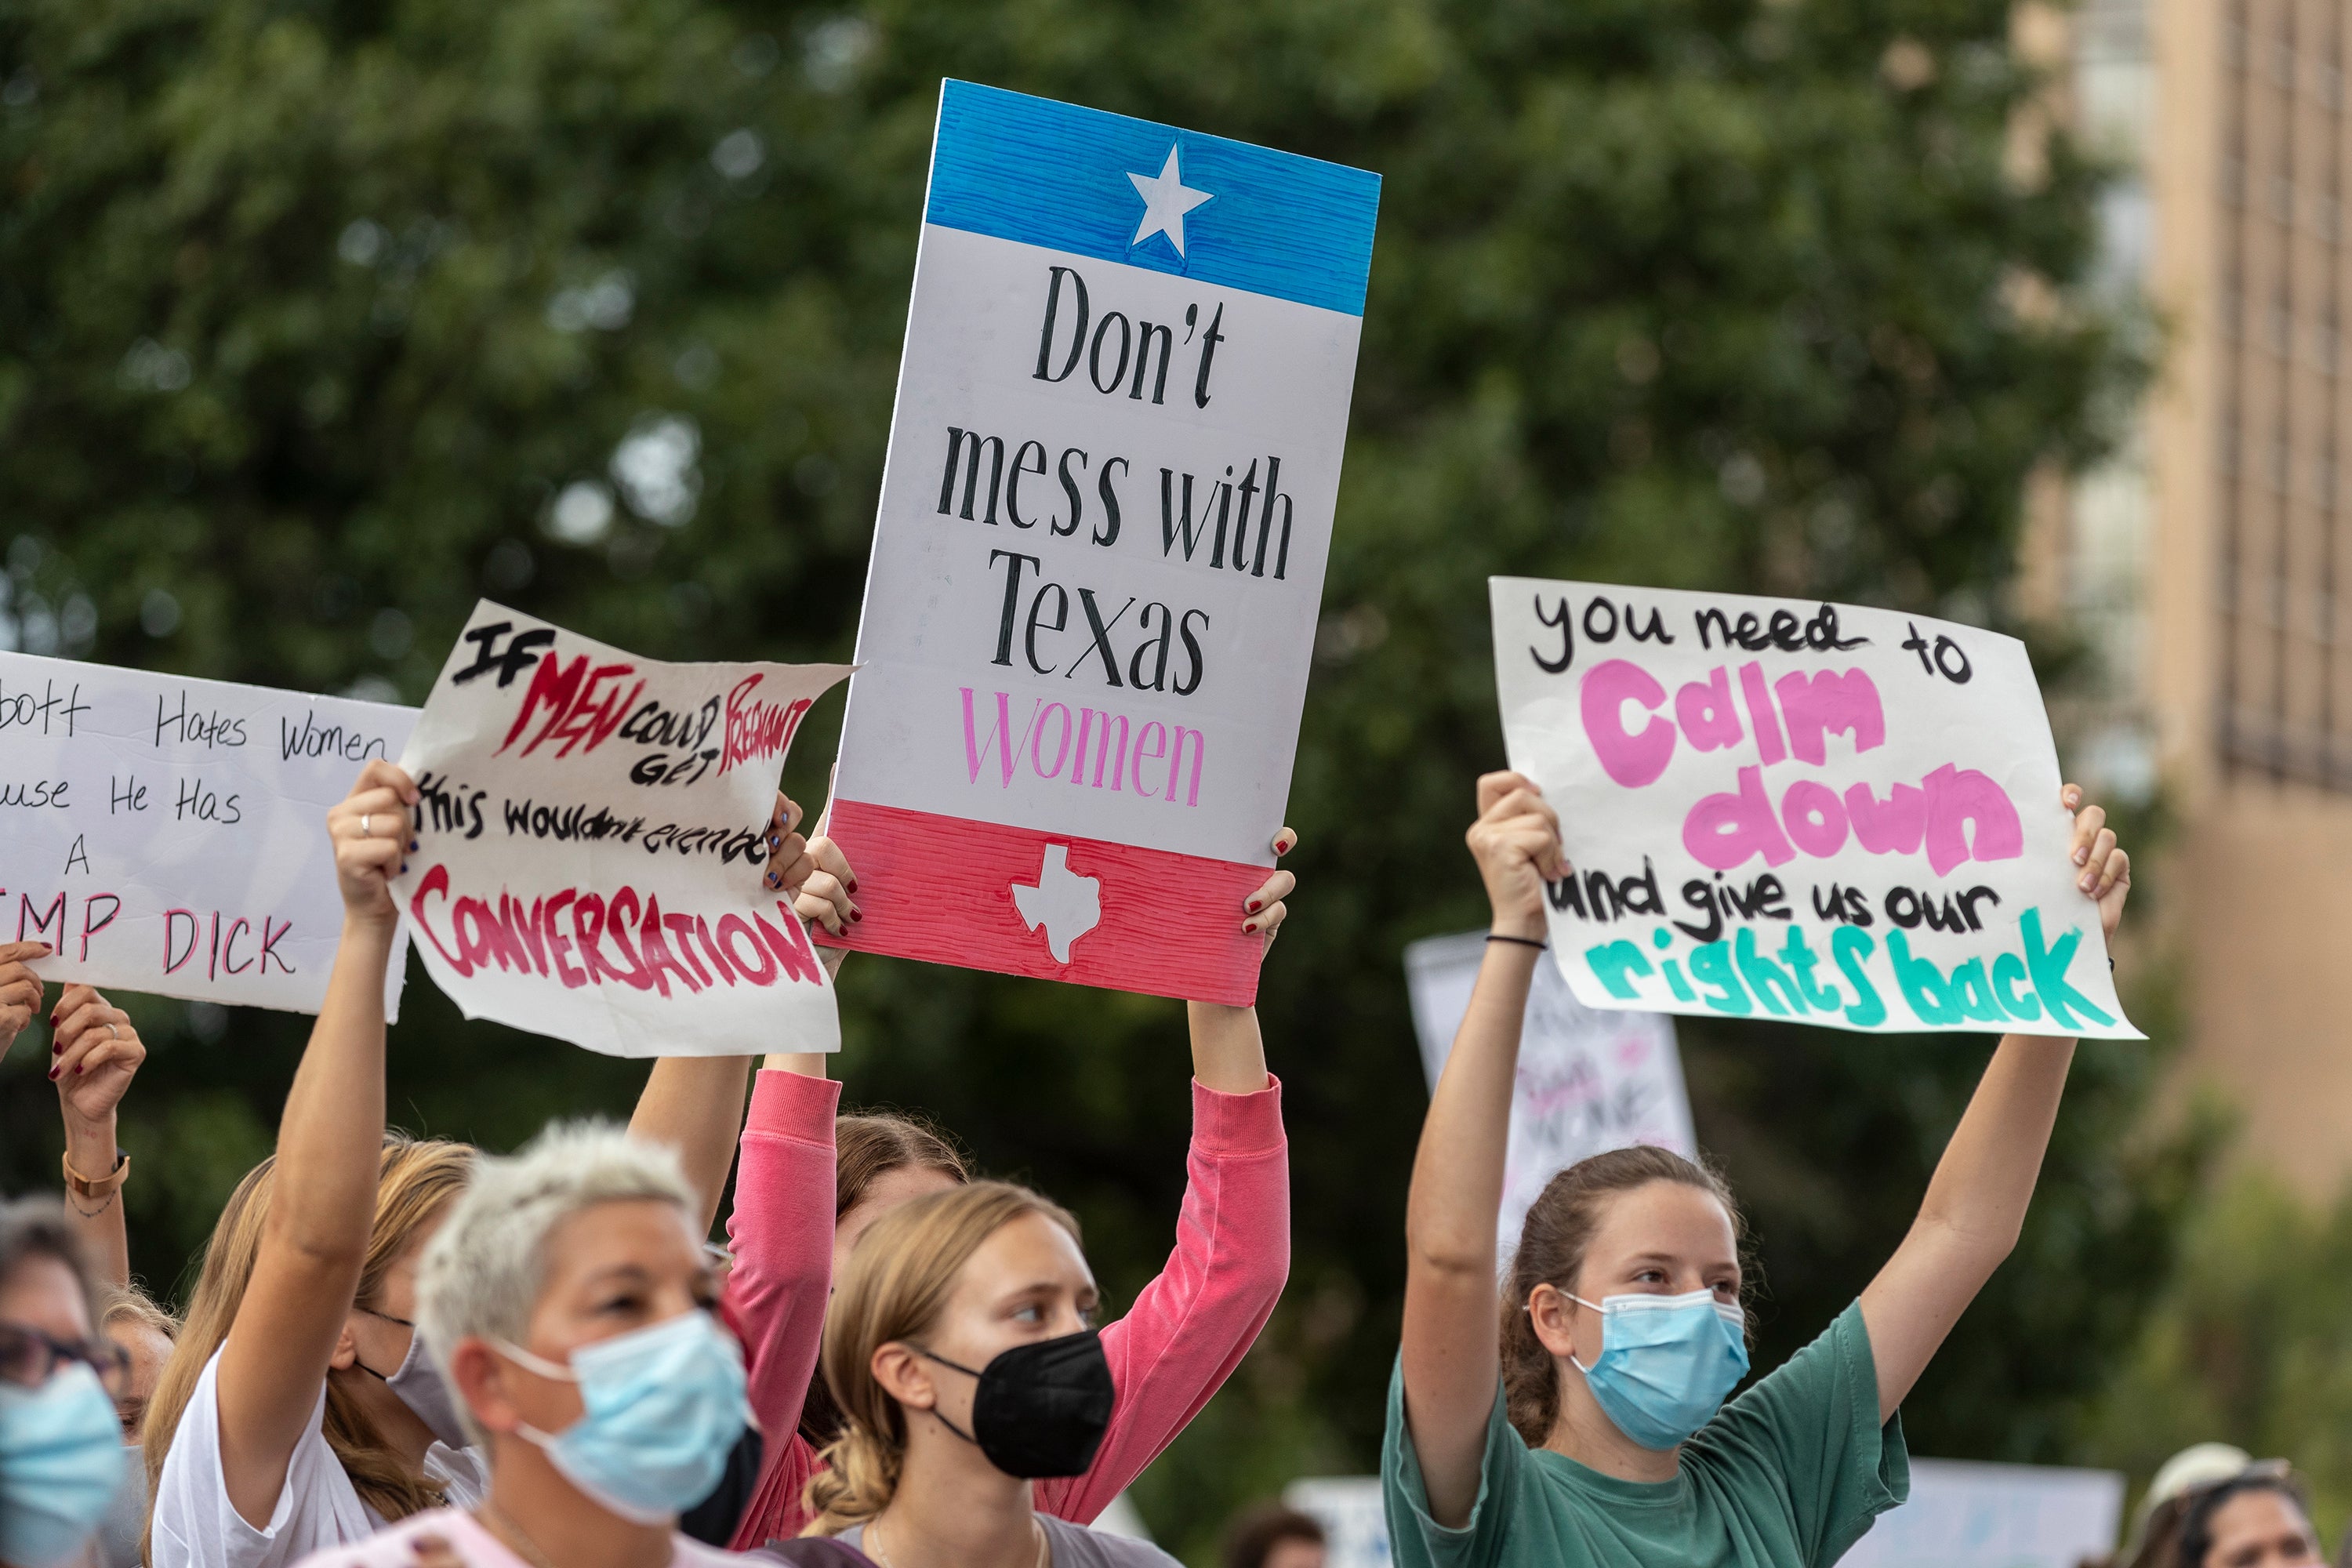 People attend the Women’s March ATX rally, at the Texas State Capitol in Austin, Texas.